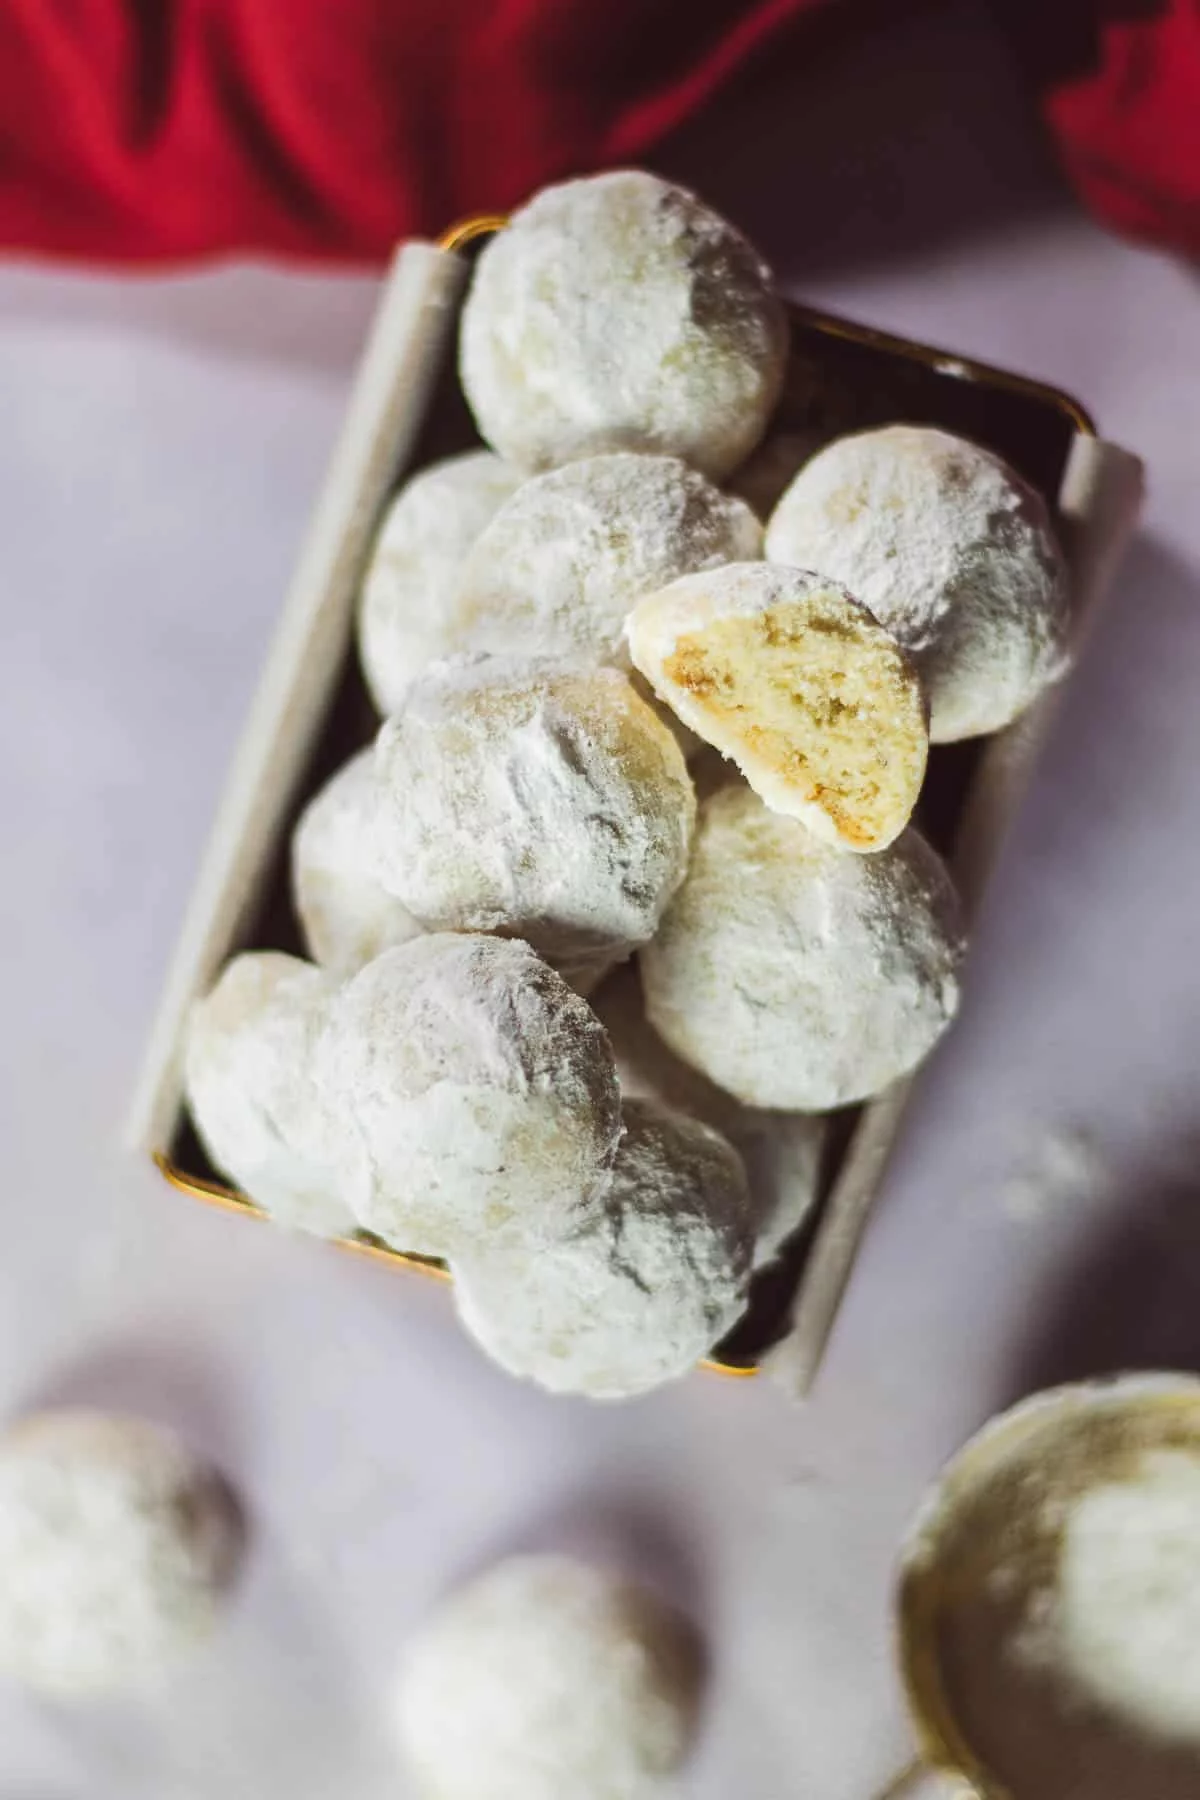 Only 4 Ingredients! Snowball Cookie Recipe that melt in your mouth